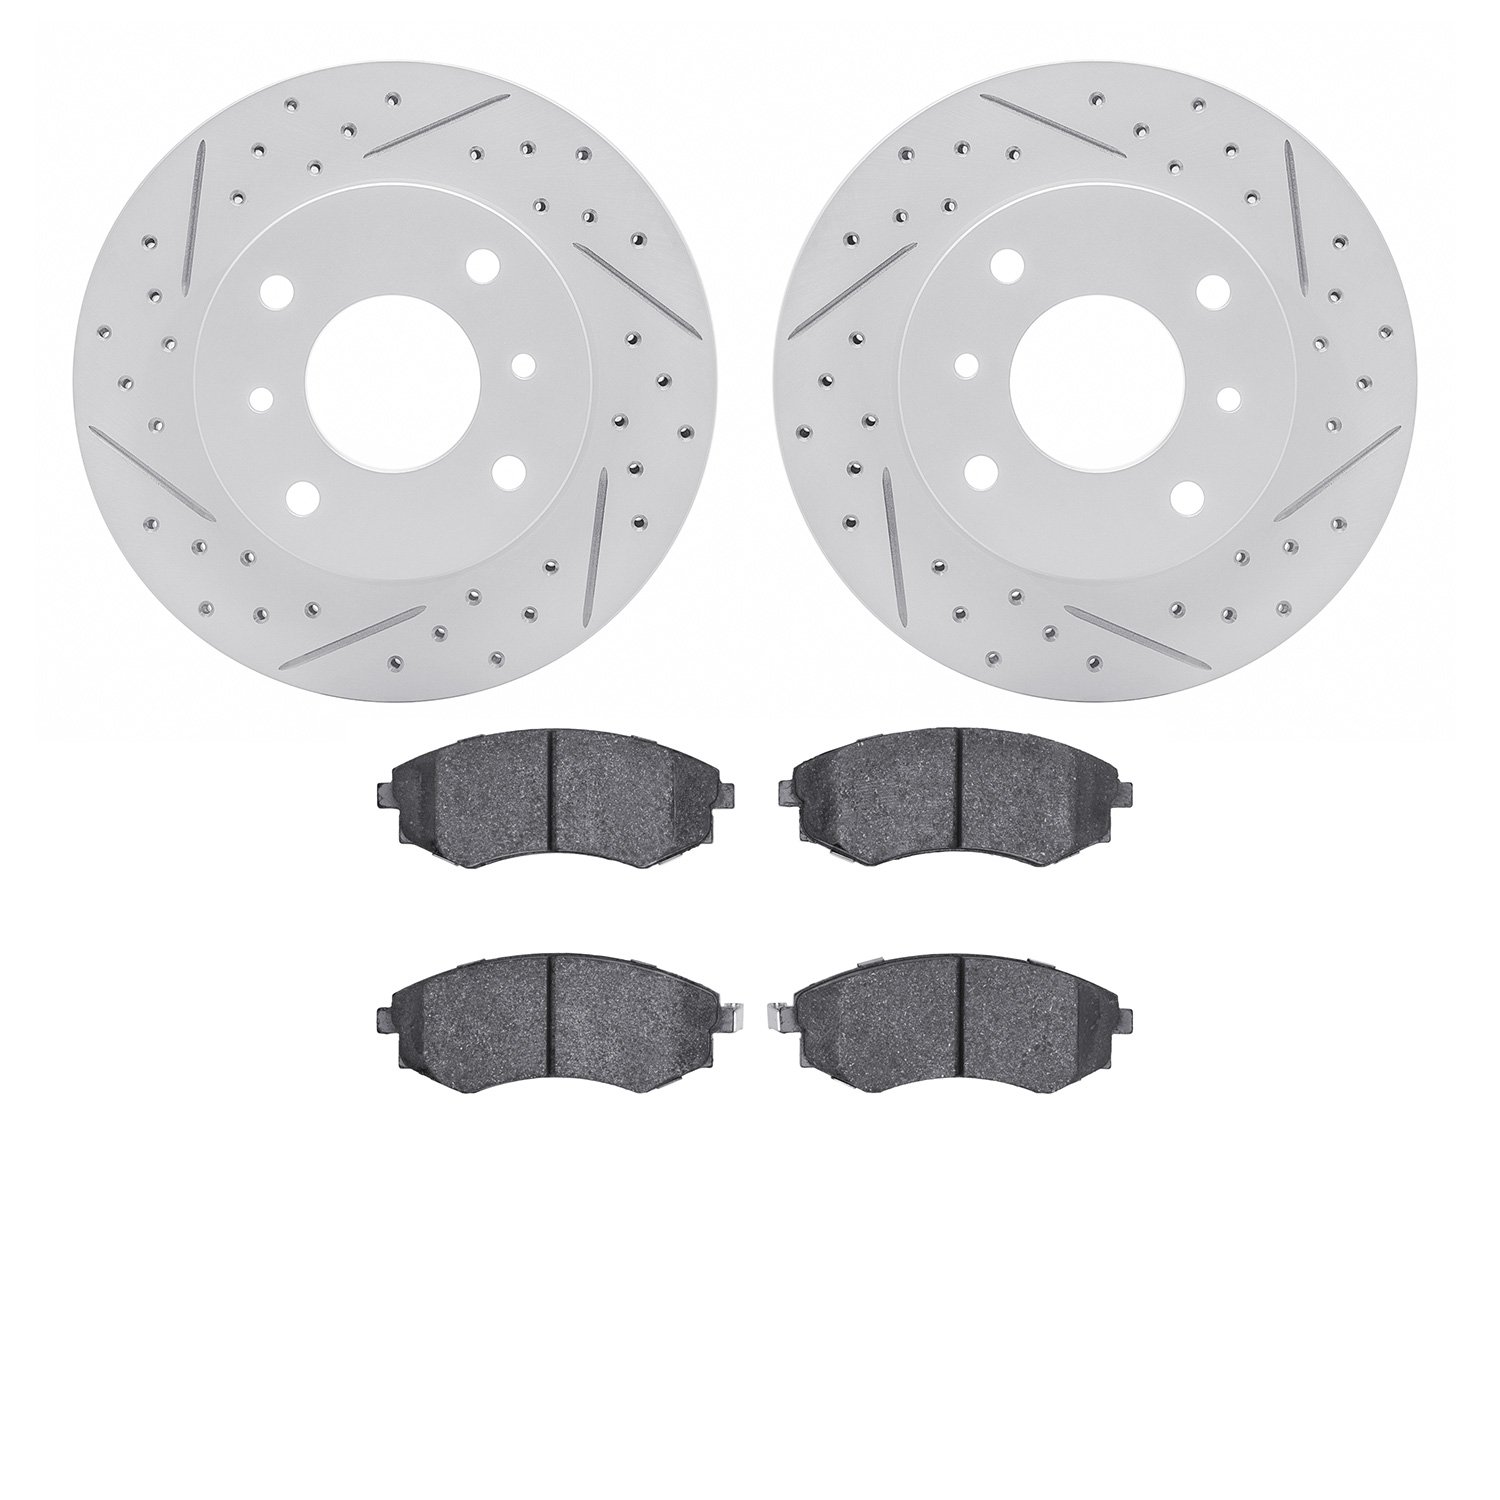 2502-67002 Geoperformance Drilled/Slotted Rotors w/5000 Advanced Brake Pads Kit, 1989-1996 Infiniti/Nissan, Position: Front